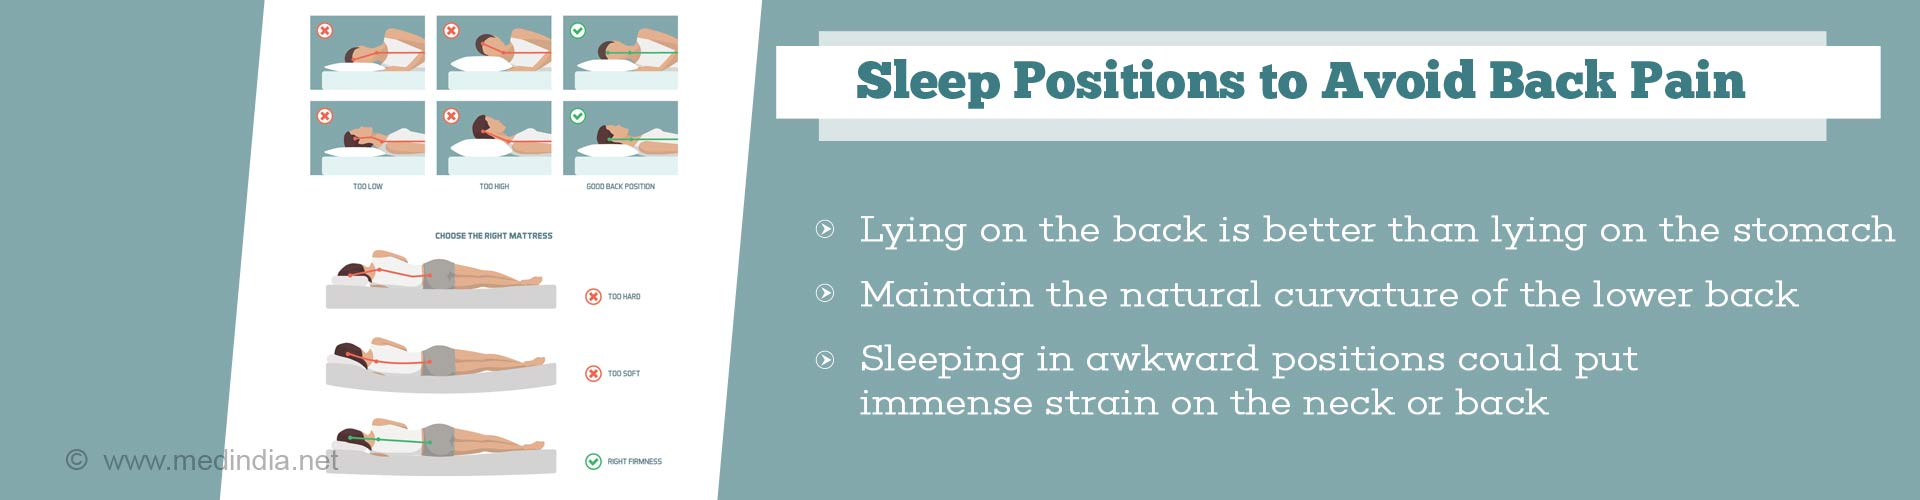 Sleep positions to avoid back pain
- lying on the back is better than lying on the stomach
- maintain the natural curvature of he lower back
- sleeping in awkward positions could put immense strain on the neck or back